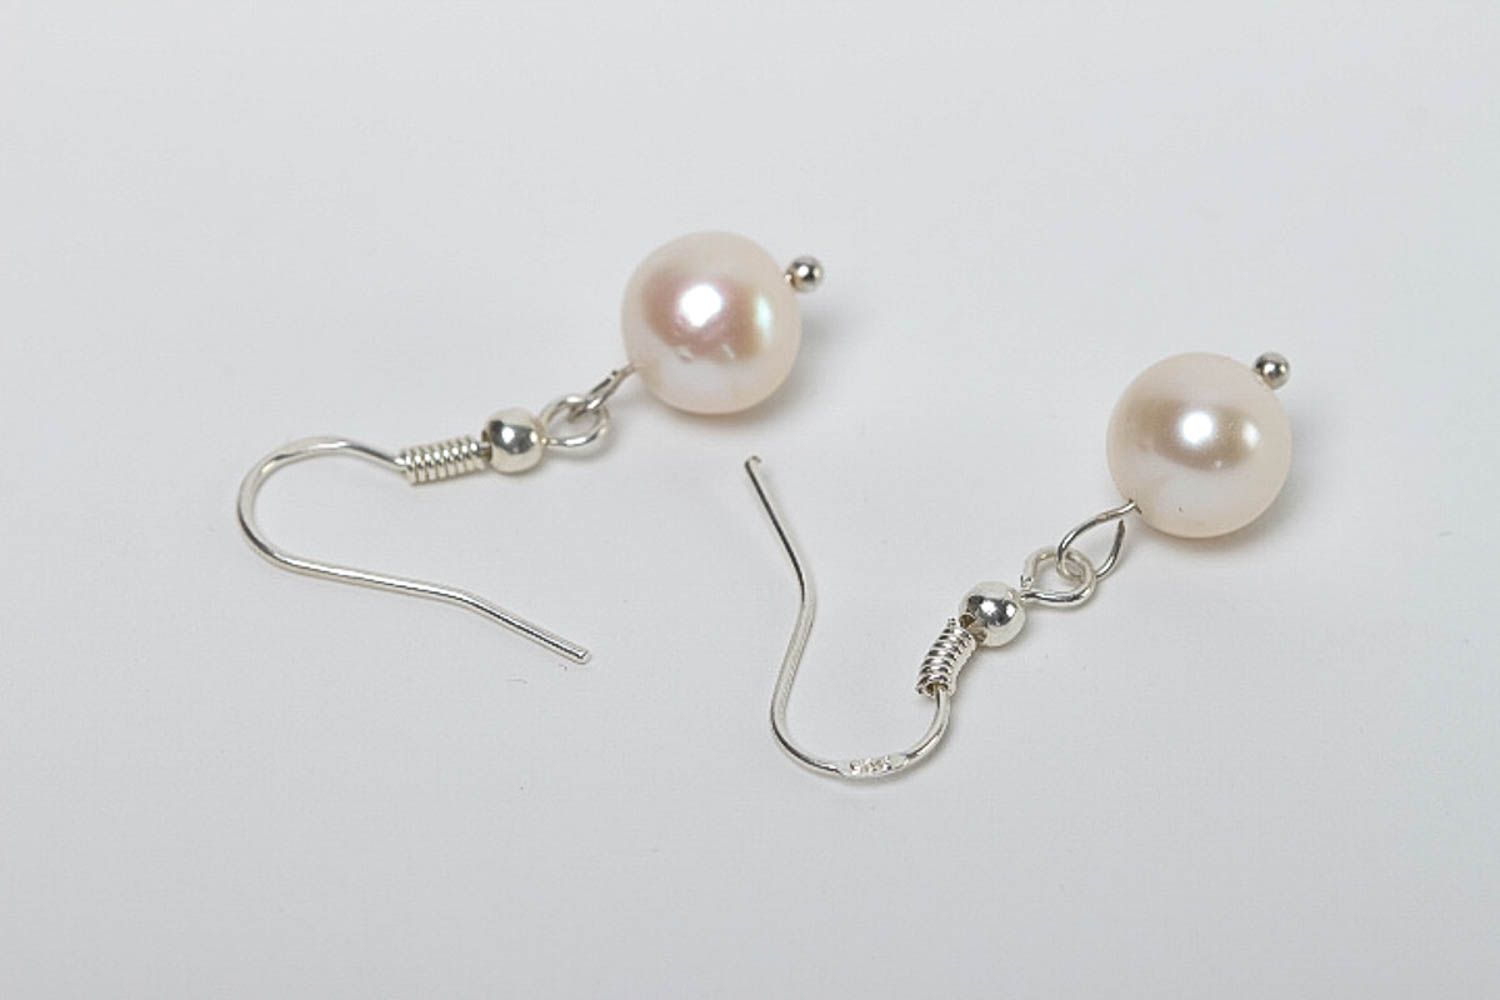 Handmade earrings with pearls earrings with charms designer accessories photo 4